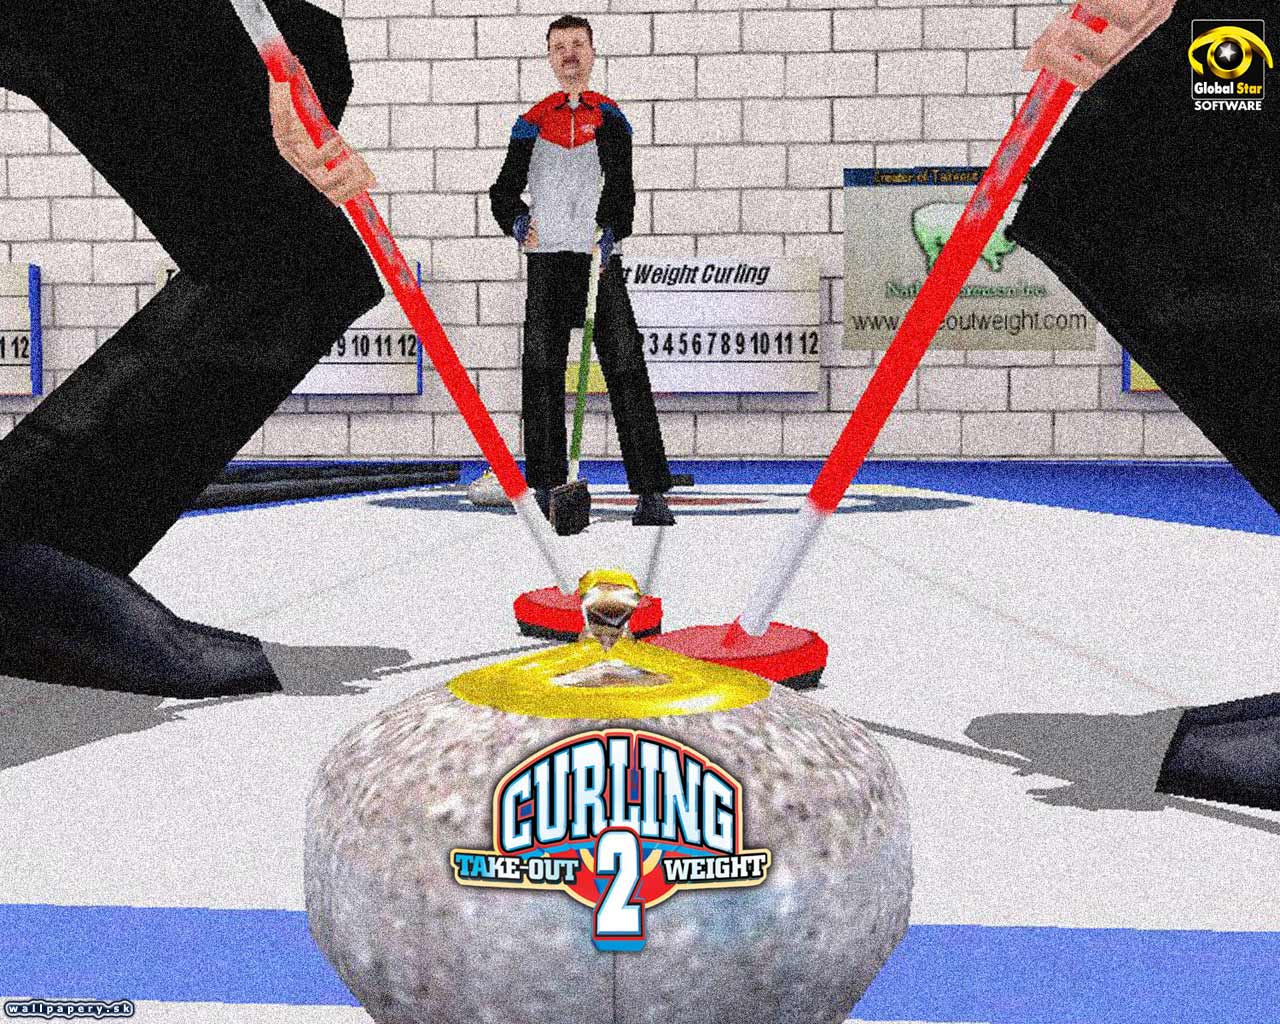 Take Out Weight Curling 2 - wallpaper 3